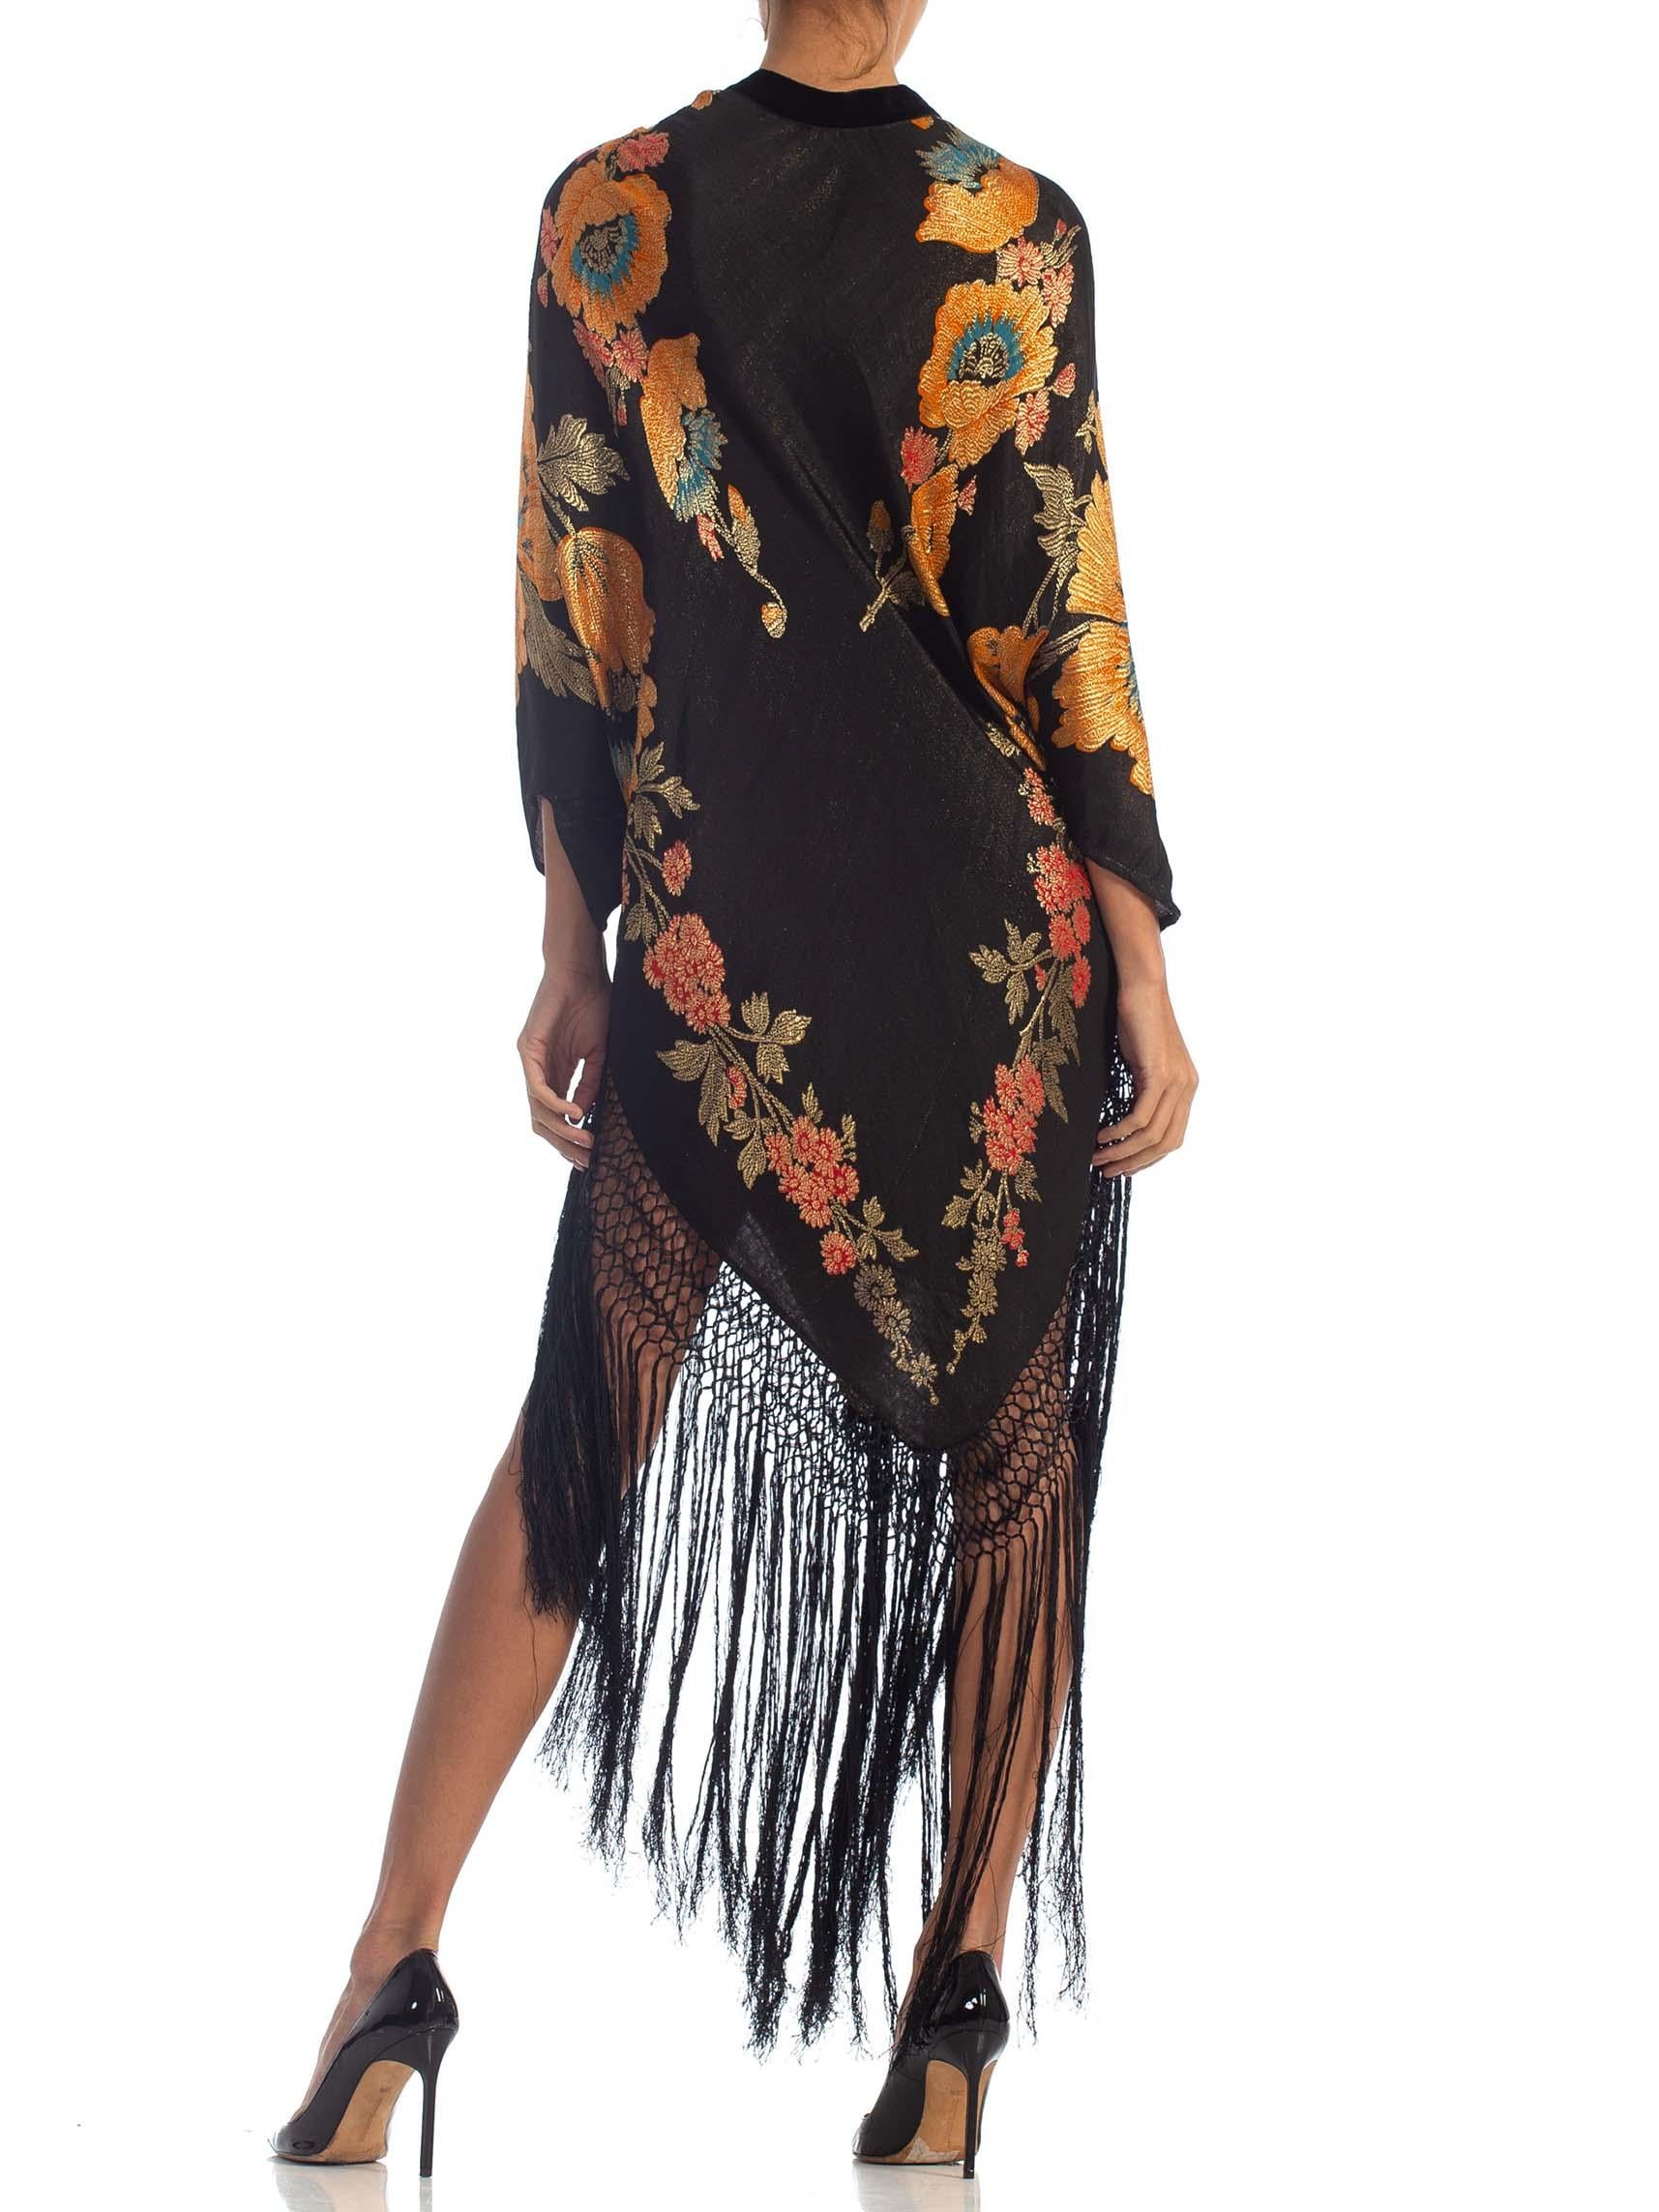 MORPHEW COLLECTION Floral Gold Lamé Silk Tunic Dress With Fringe 5